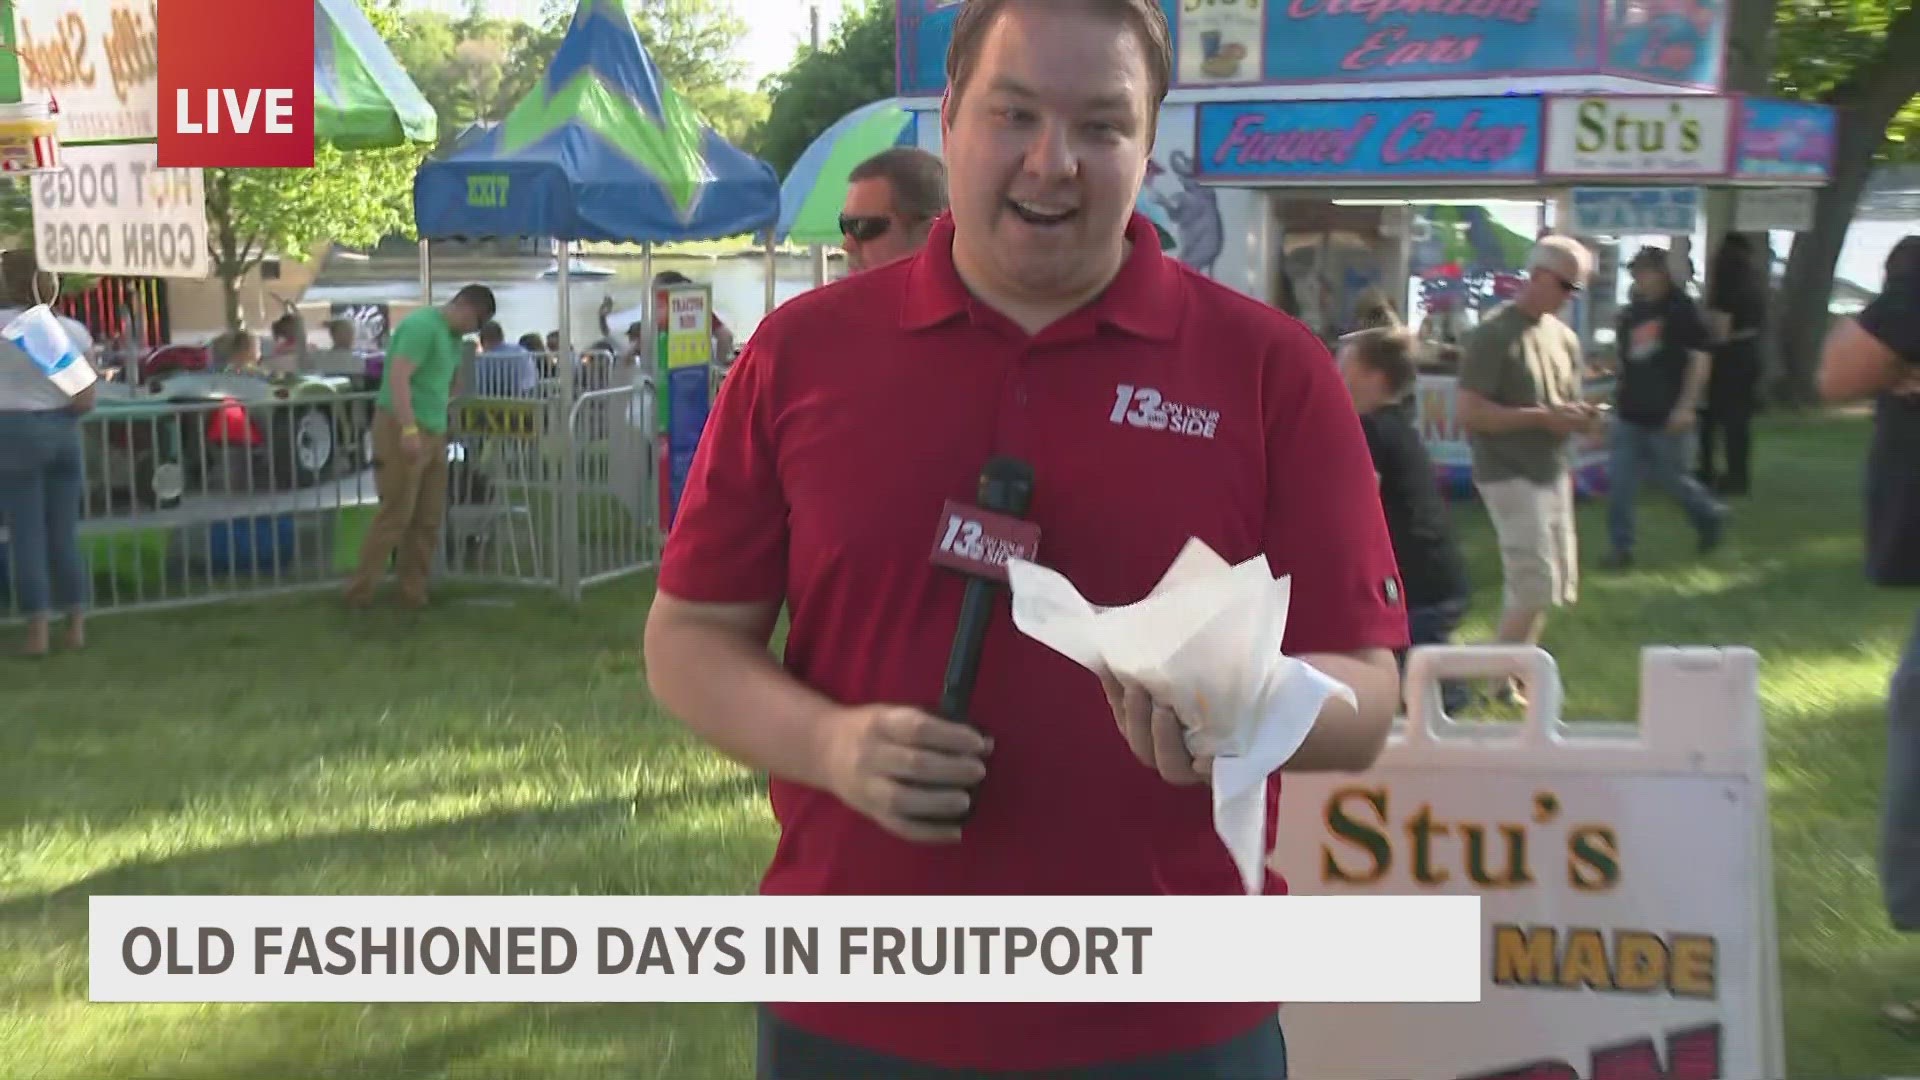 Lots of events and food to take in this weekend at Old Fashioned Days in Fruitport! Meteorologist Michael Behrens tries some of the local fare!